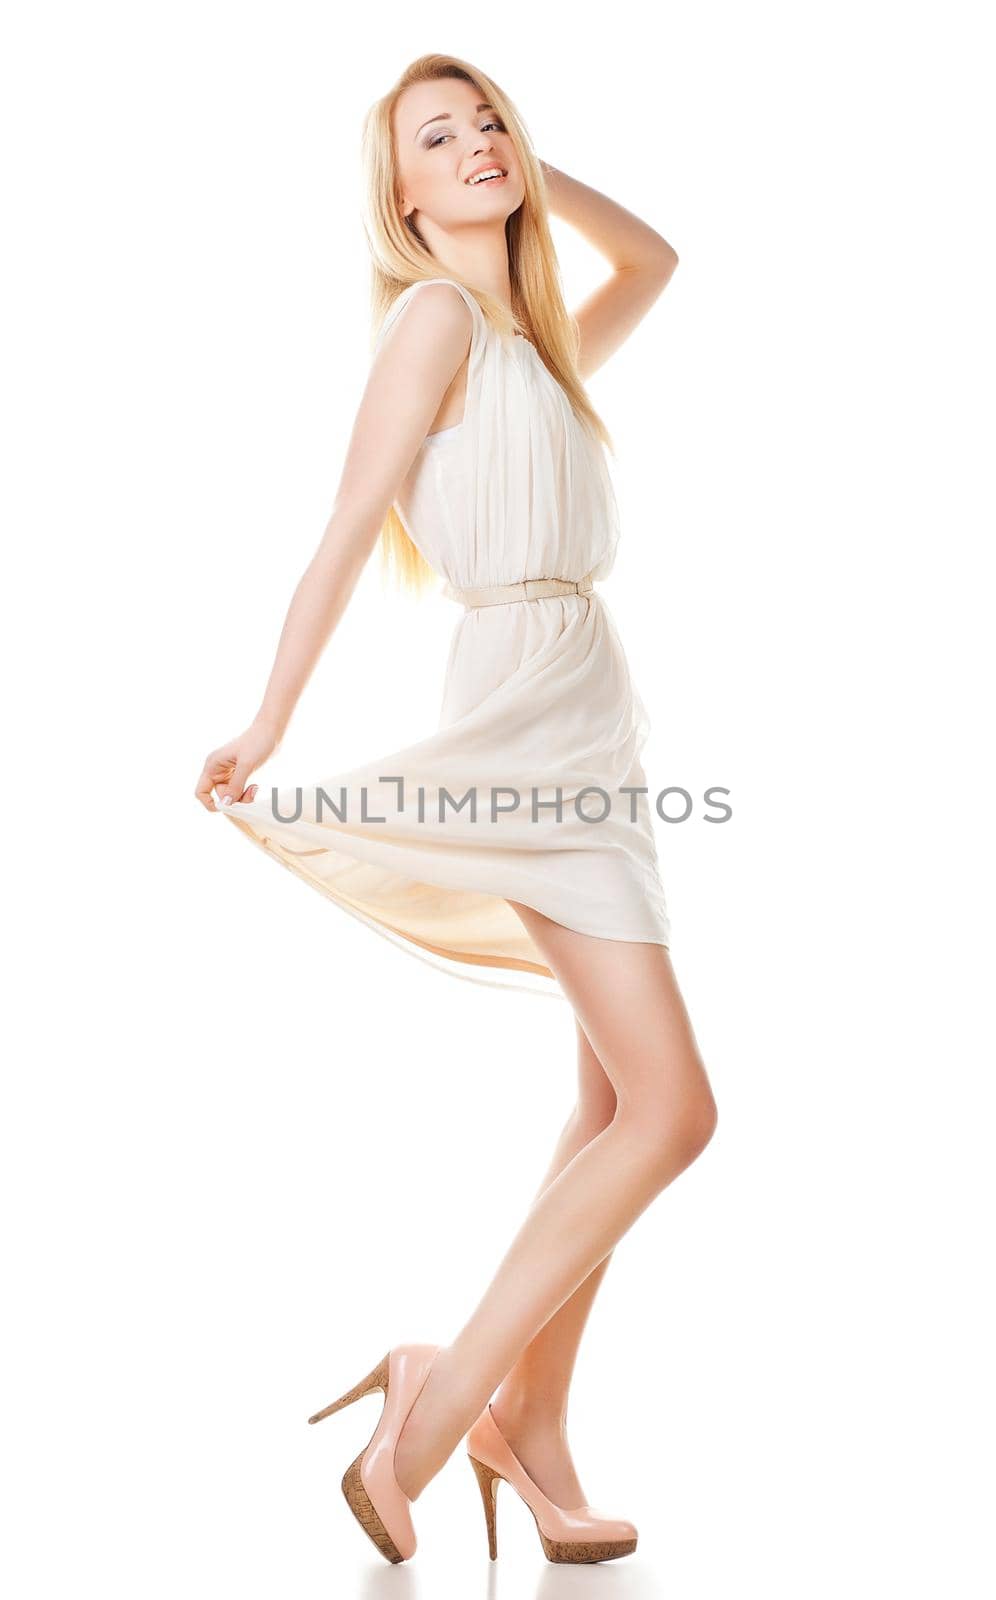 Portrait of beautyful smiling and posing blond woman with long hair on white background